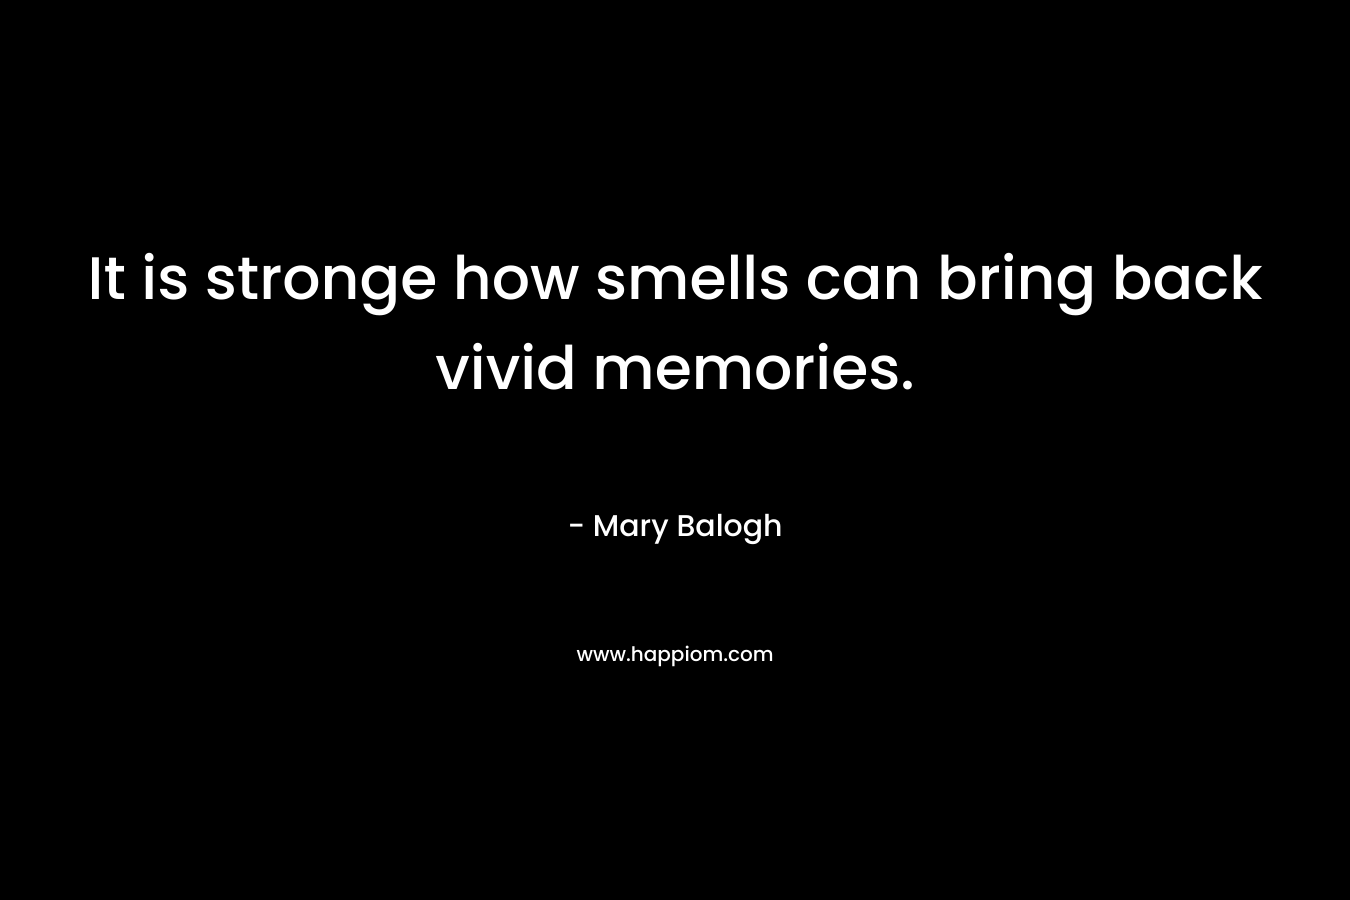 It is stronge how smells can bring back vivid memories. – Mary Balogh